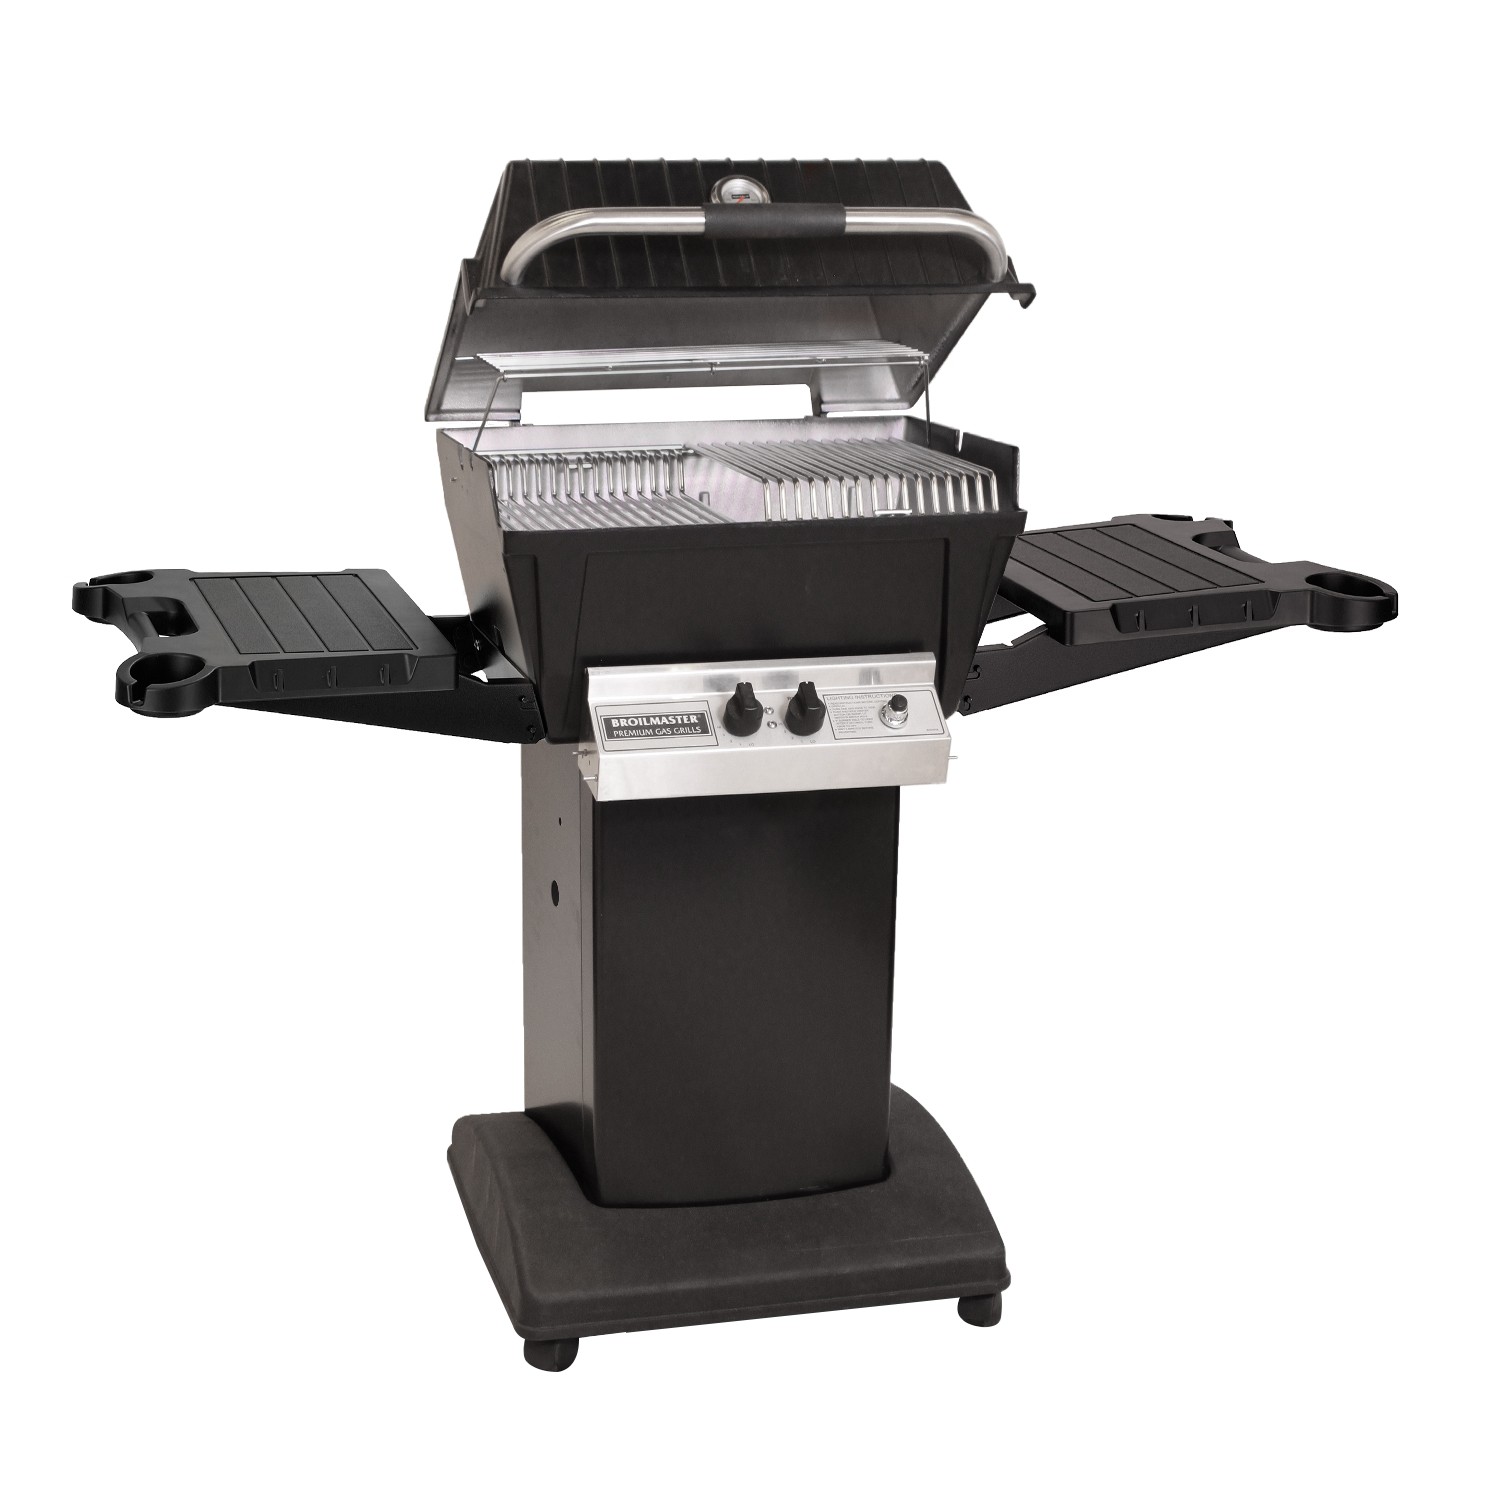 BROILMASTER P4XF PREMIUM SERIES PROPANE GAS GRILL WITH FLARE BUSTER FLAVOR ENHANCERS - BLACK